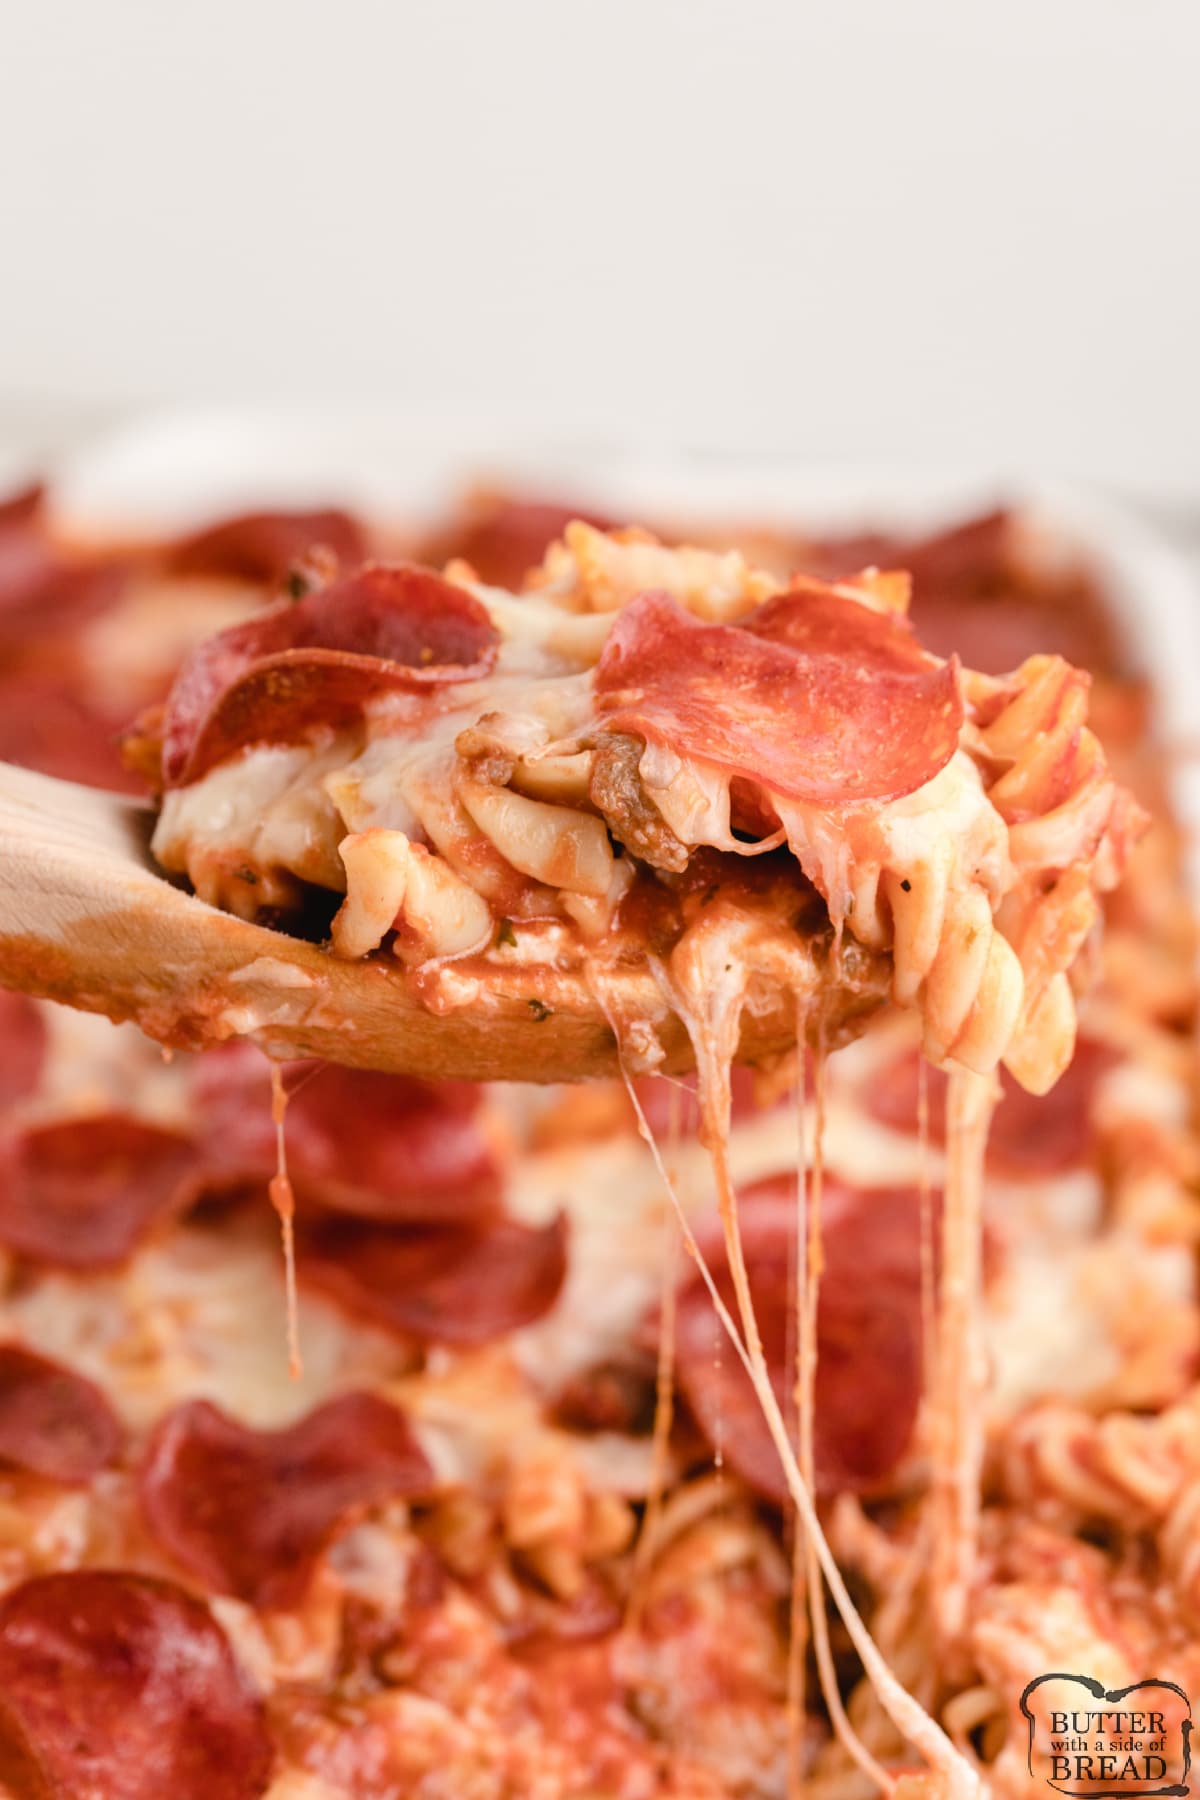 Baked pasta with cheese, spaghetti sauce and pizza toppings